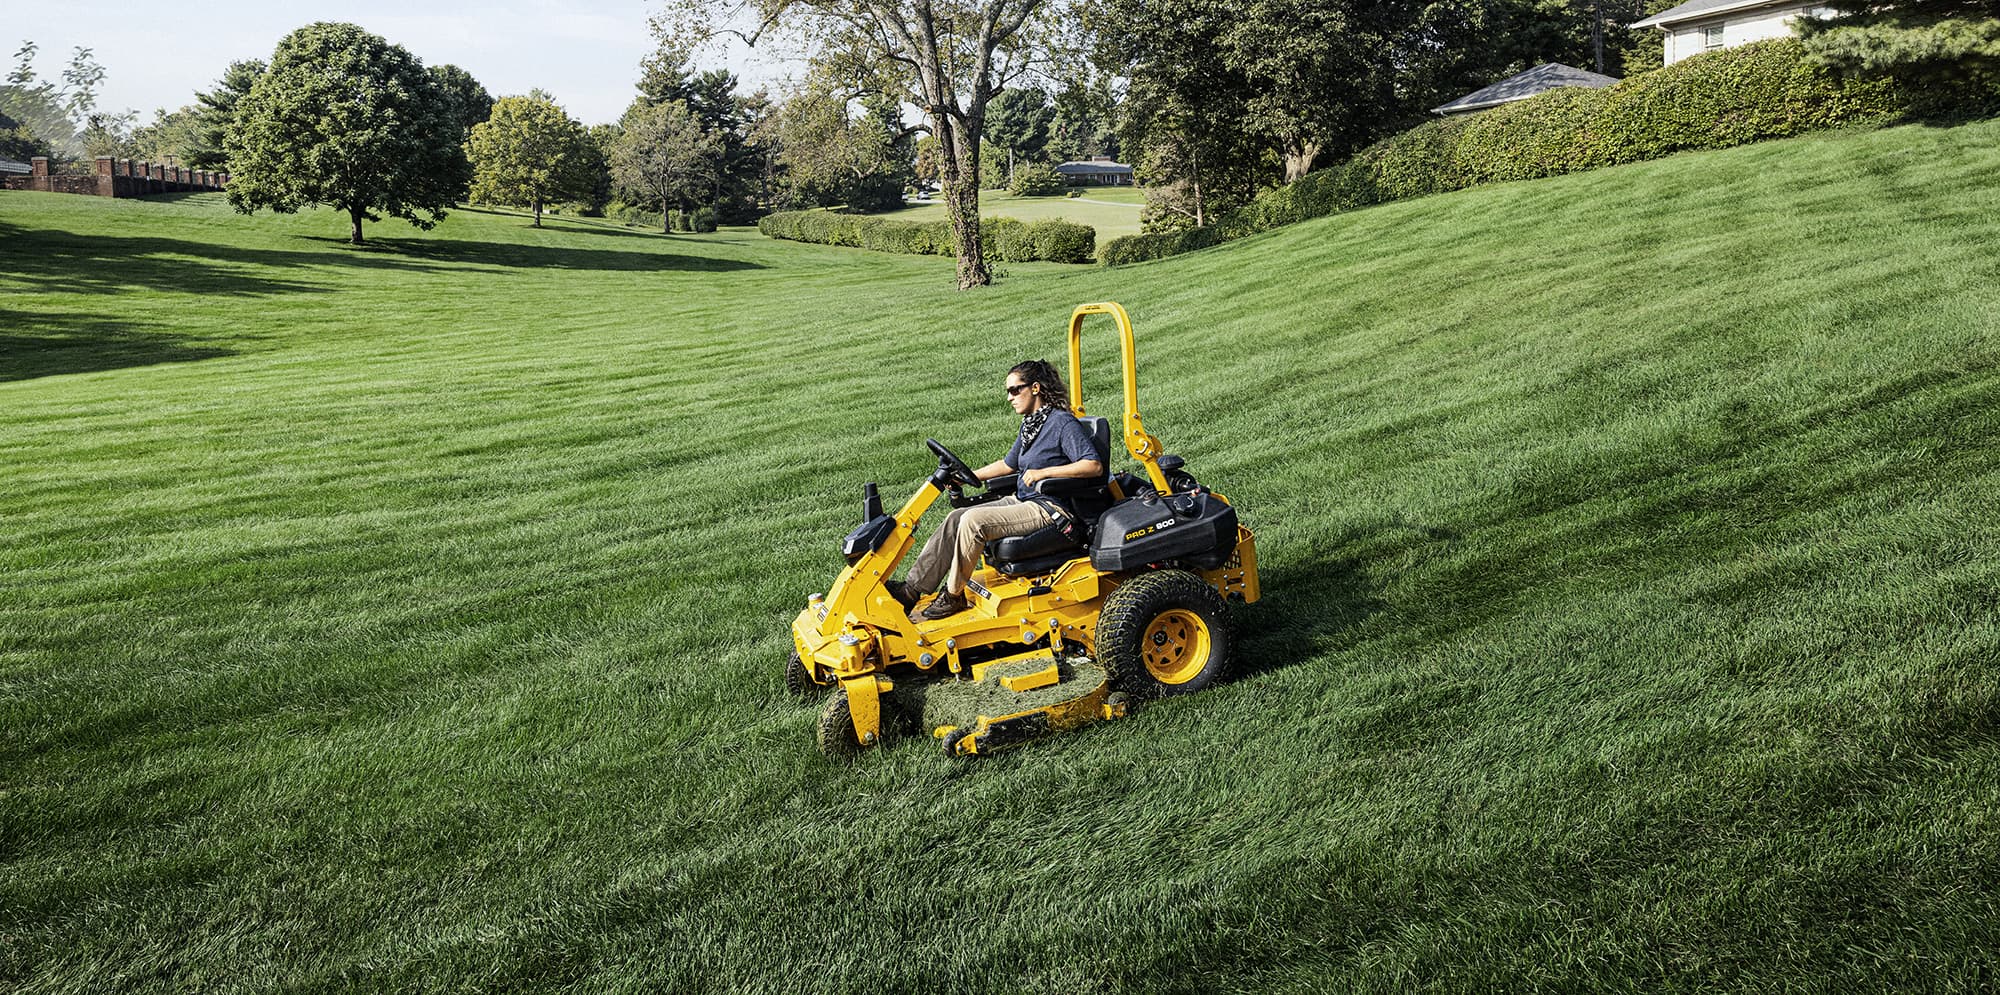 How Much is a Cub Cadet Zero Turn? Find out now!